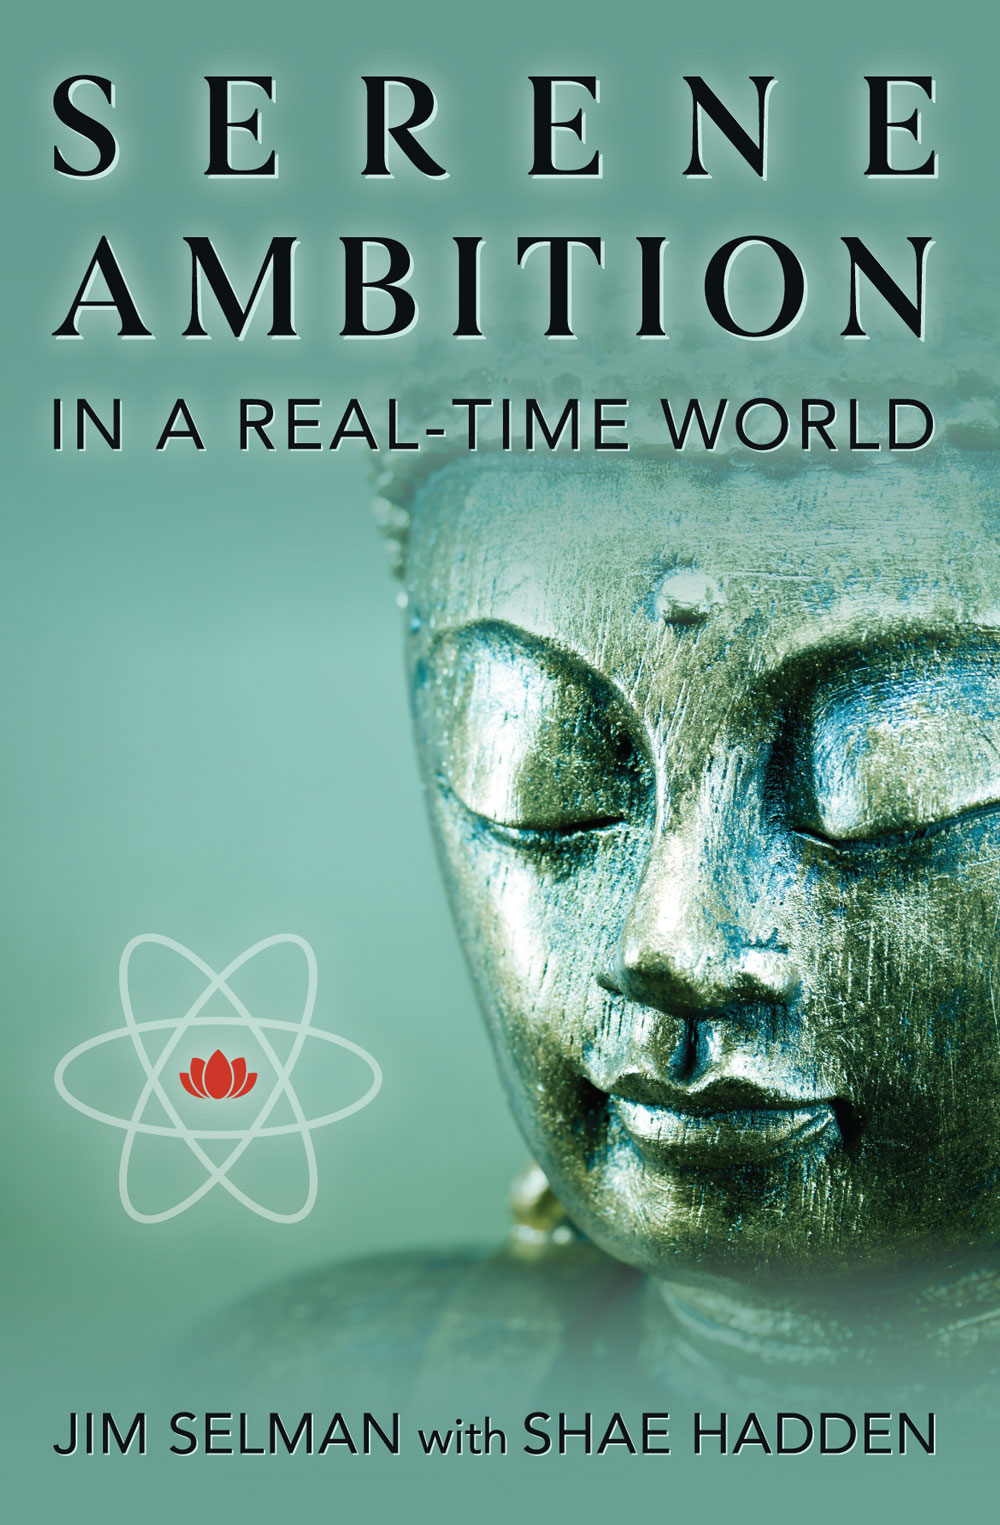 Serene Ambition in a Real-Time World